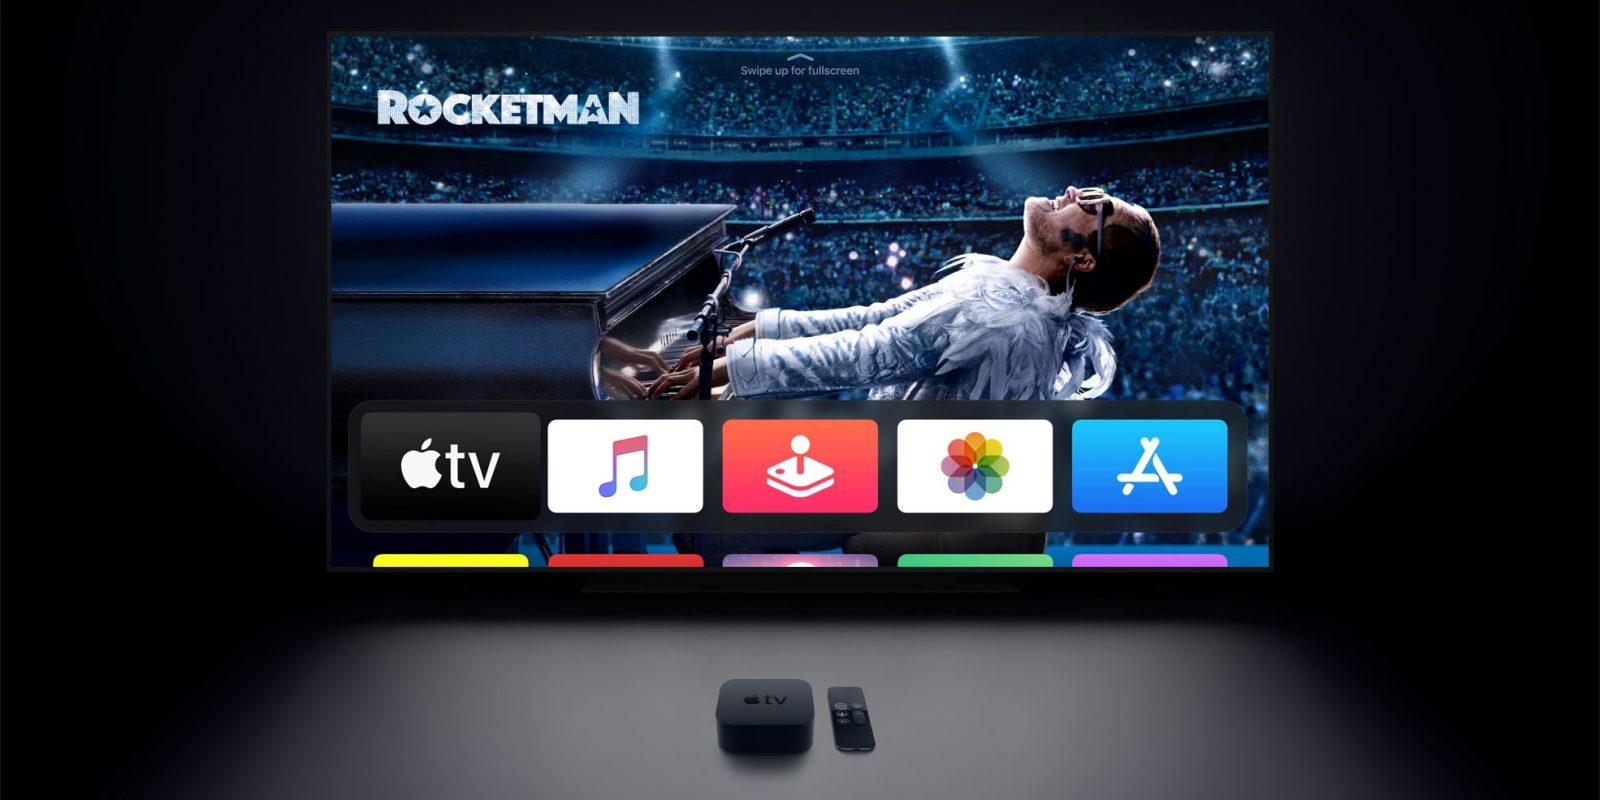 How to connect Apple TV to WiFi